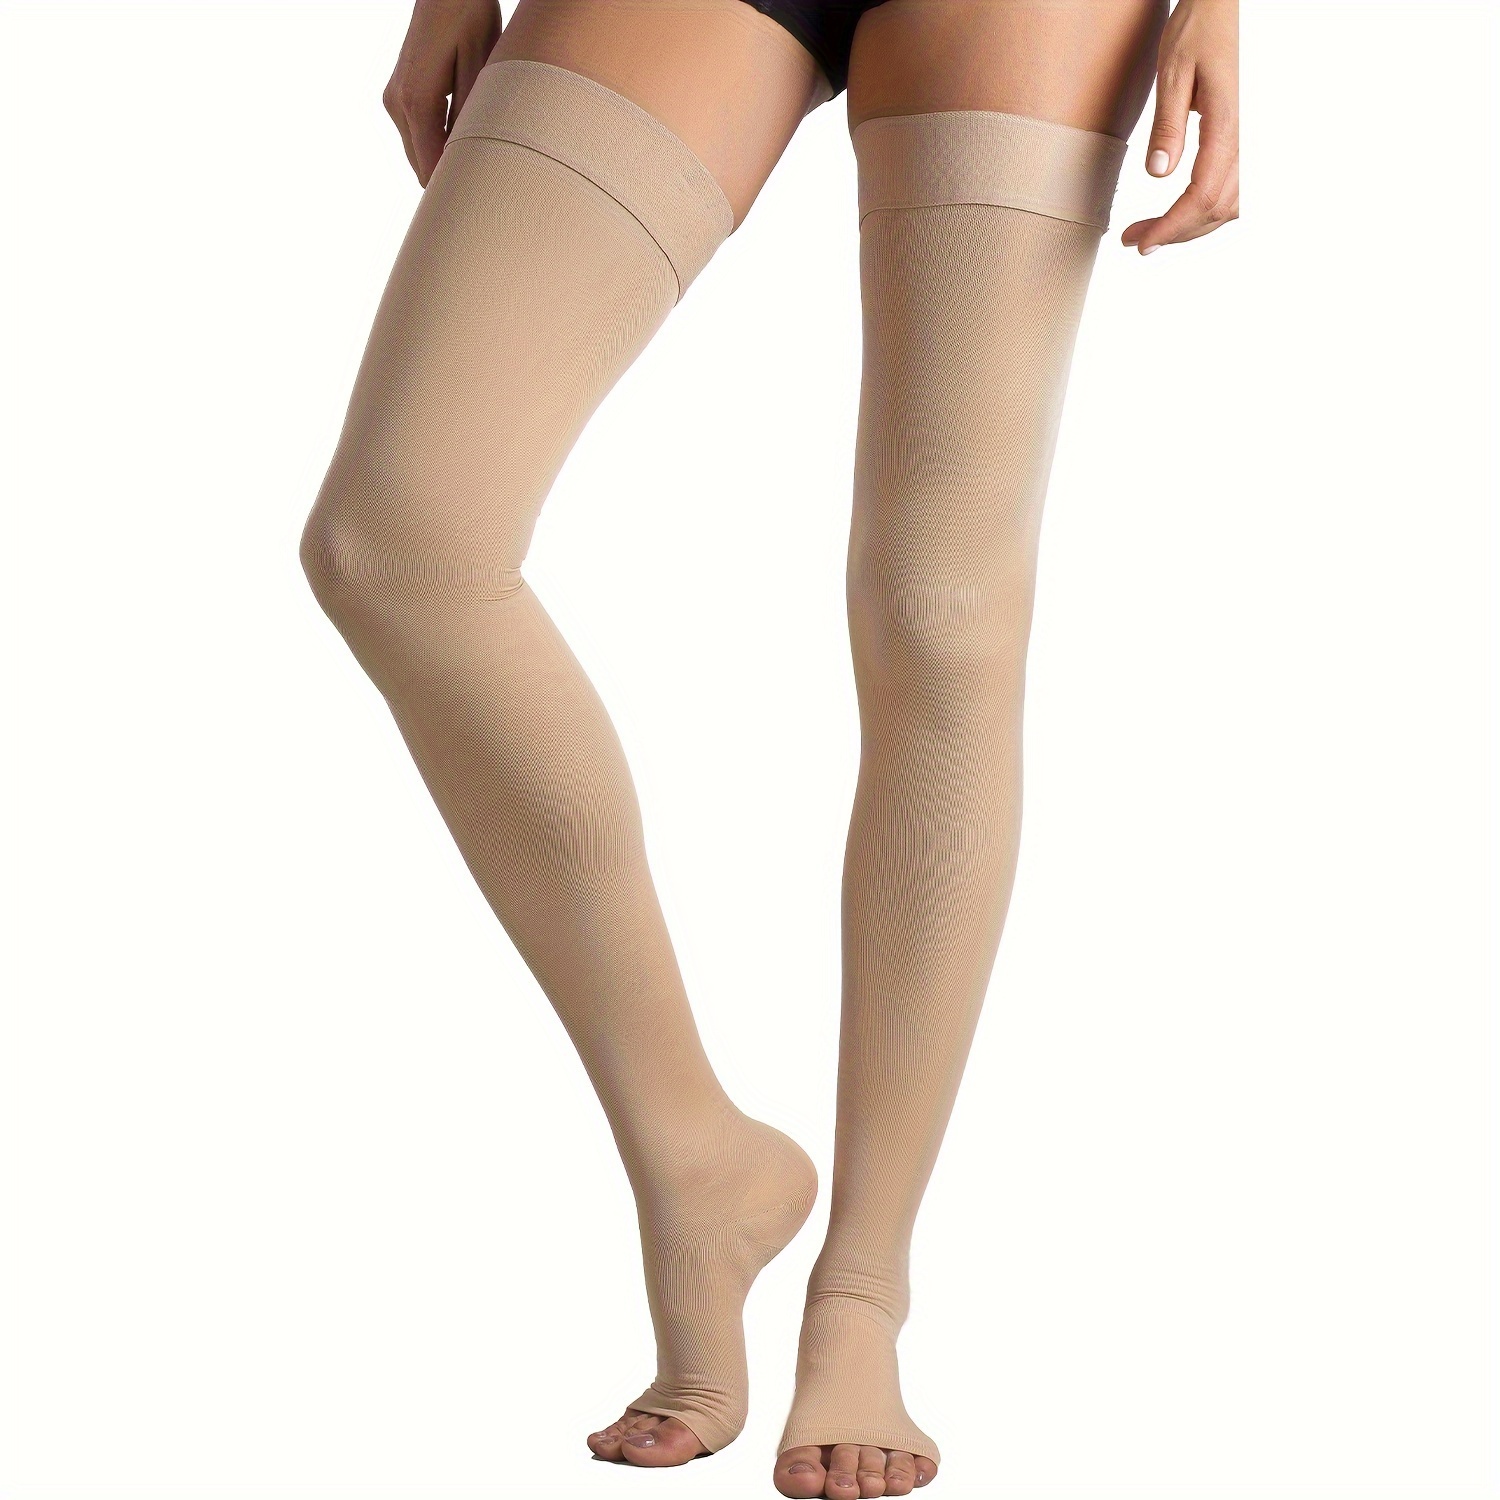 1 Pairs Compression Stockings, 15-20 MmHg Compression For Men And Women,  Thigh High Length, Open Toe